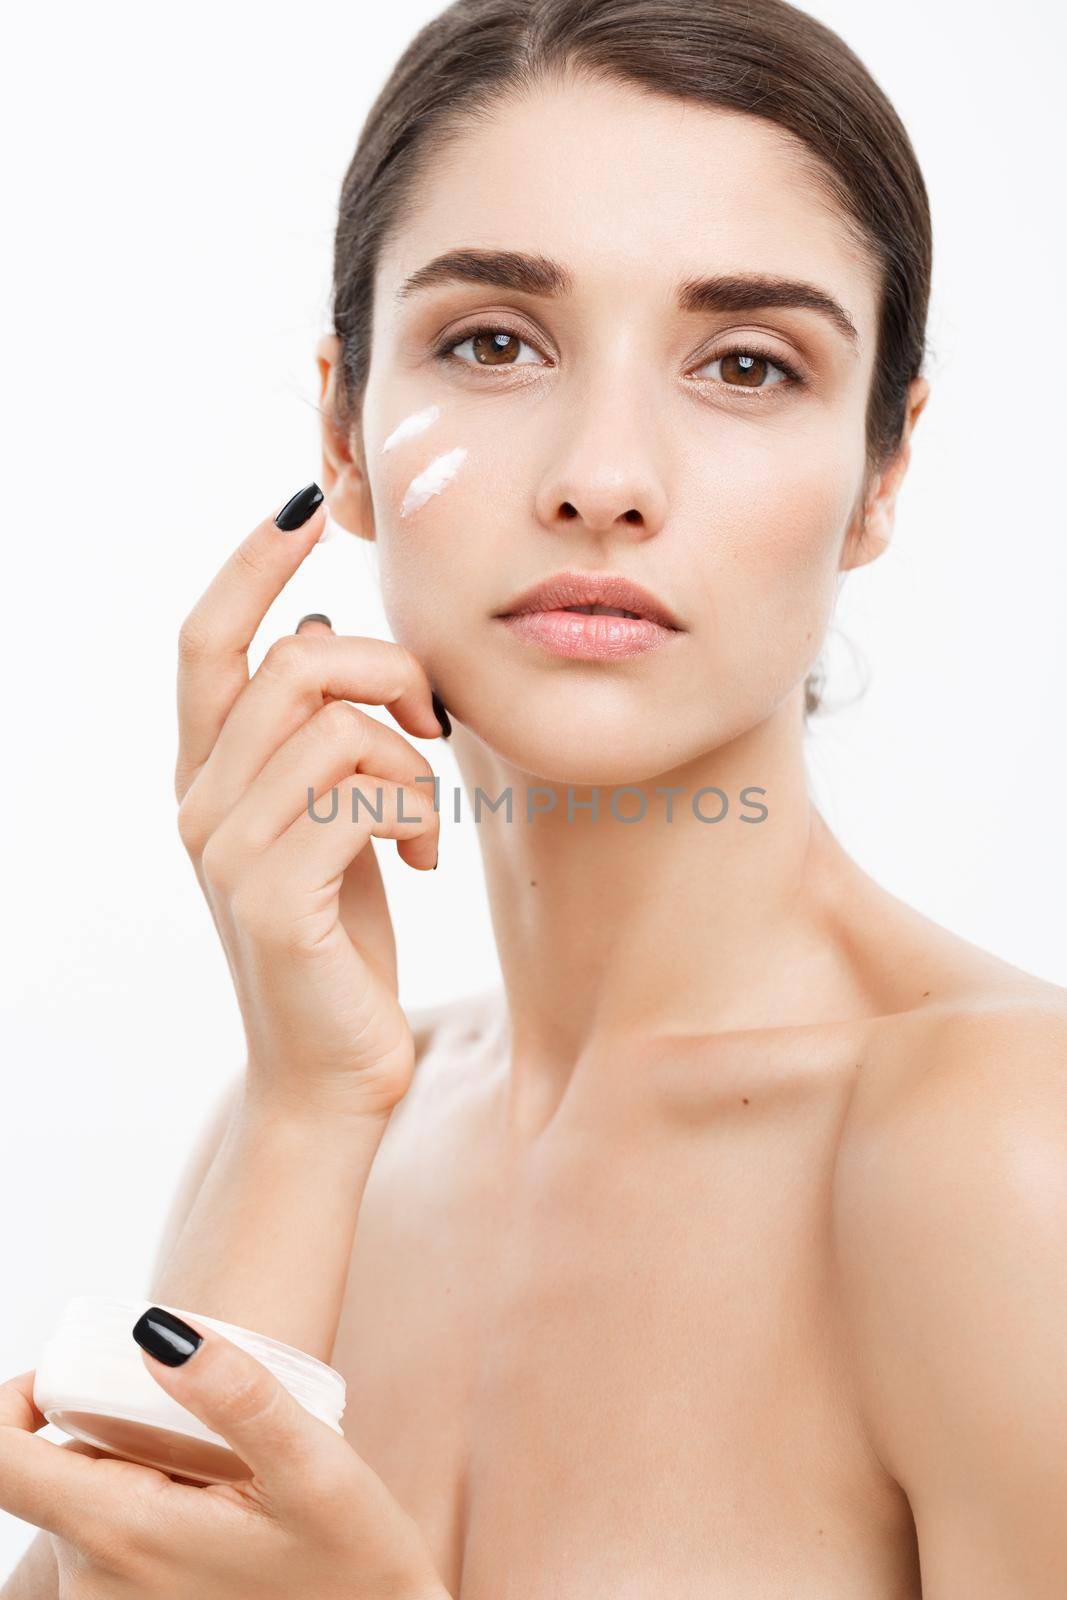 Beauty Youth Skin Care Concept - Close up Beautiful Caucasian Woman Face Portrait applying some cream to her face. Beautiful Spa model Girl with Perfect Fresh Clean Skin over white background